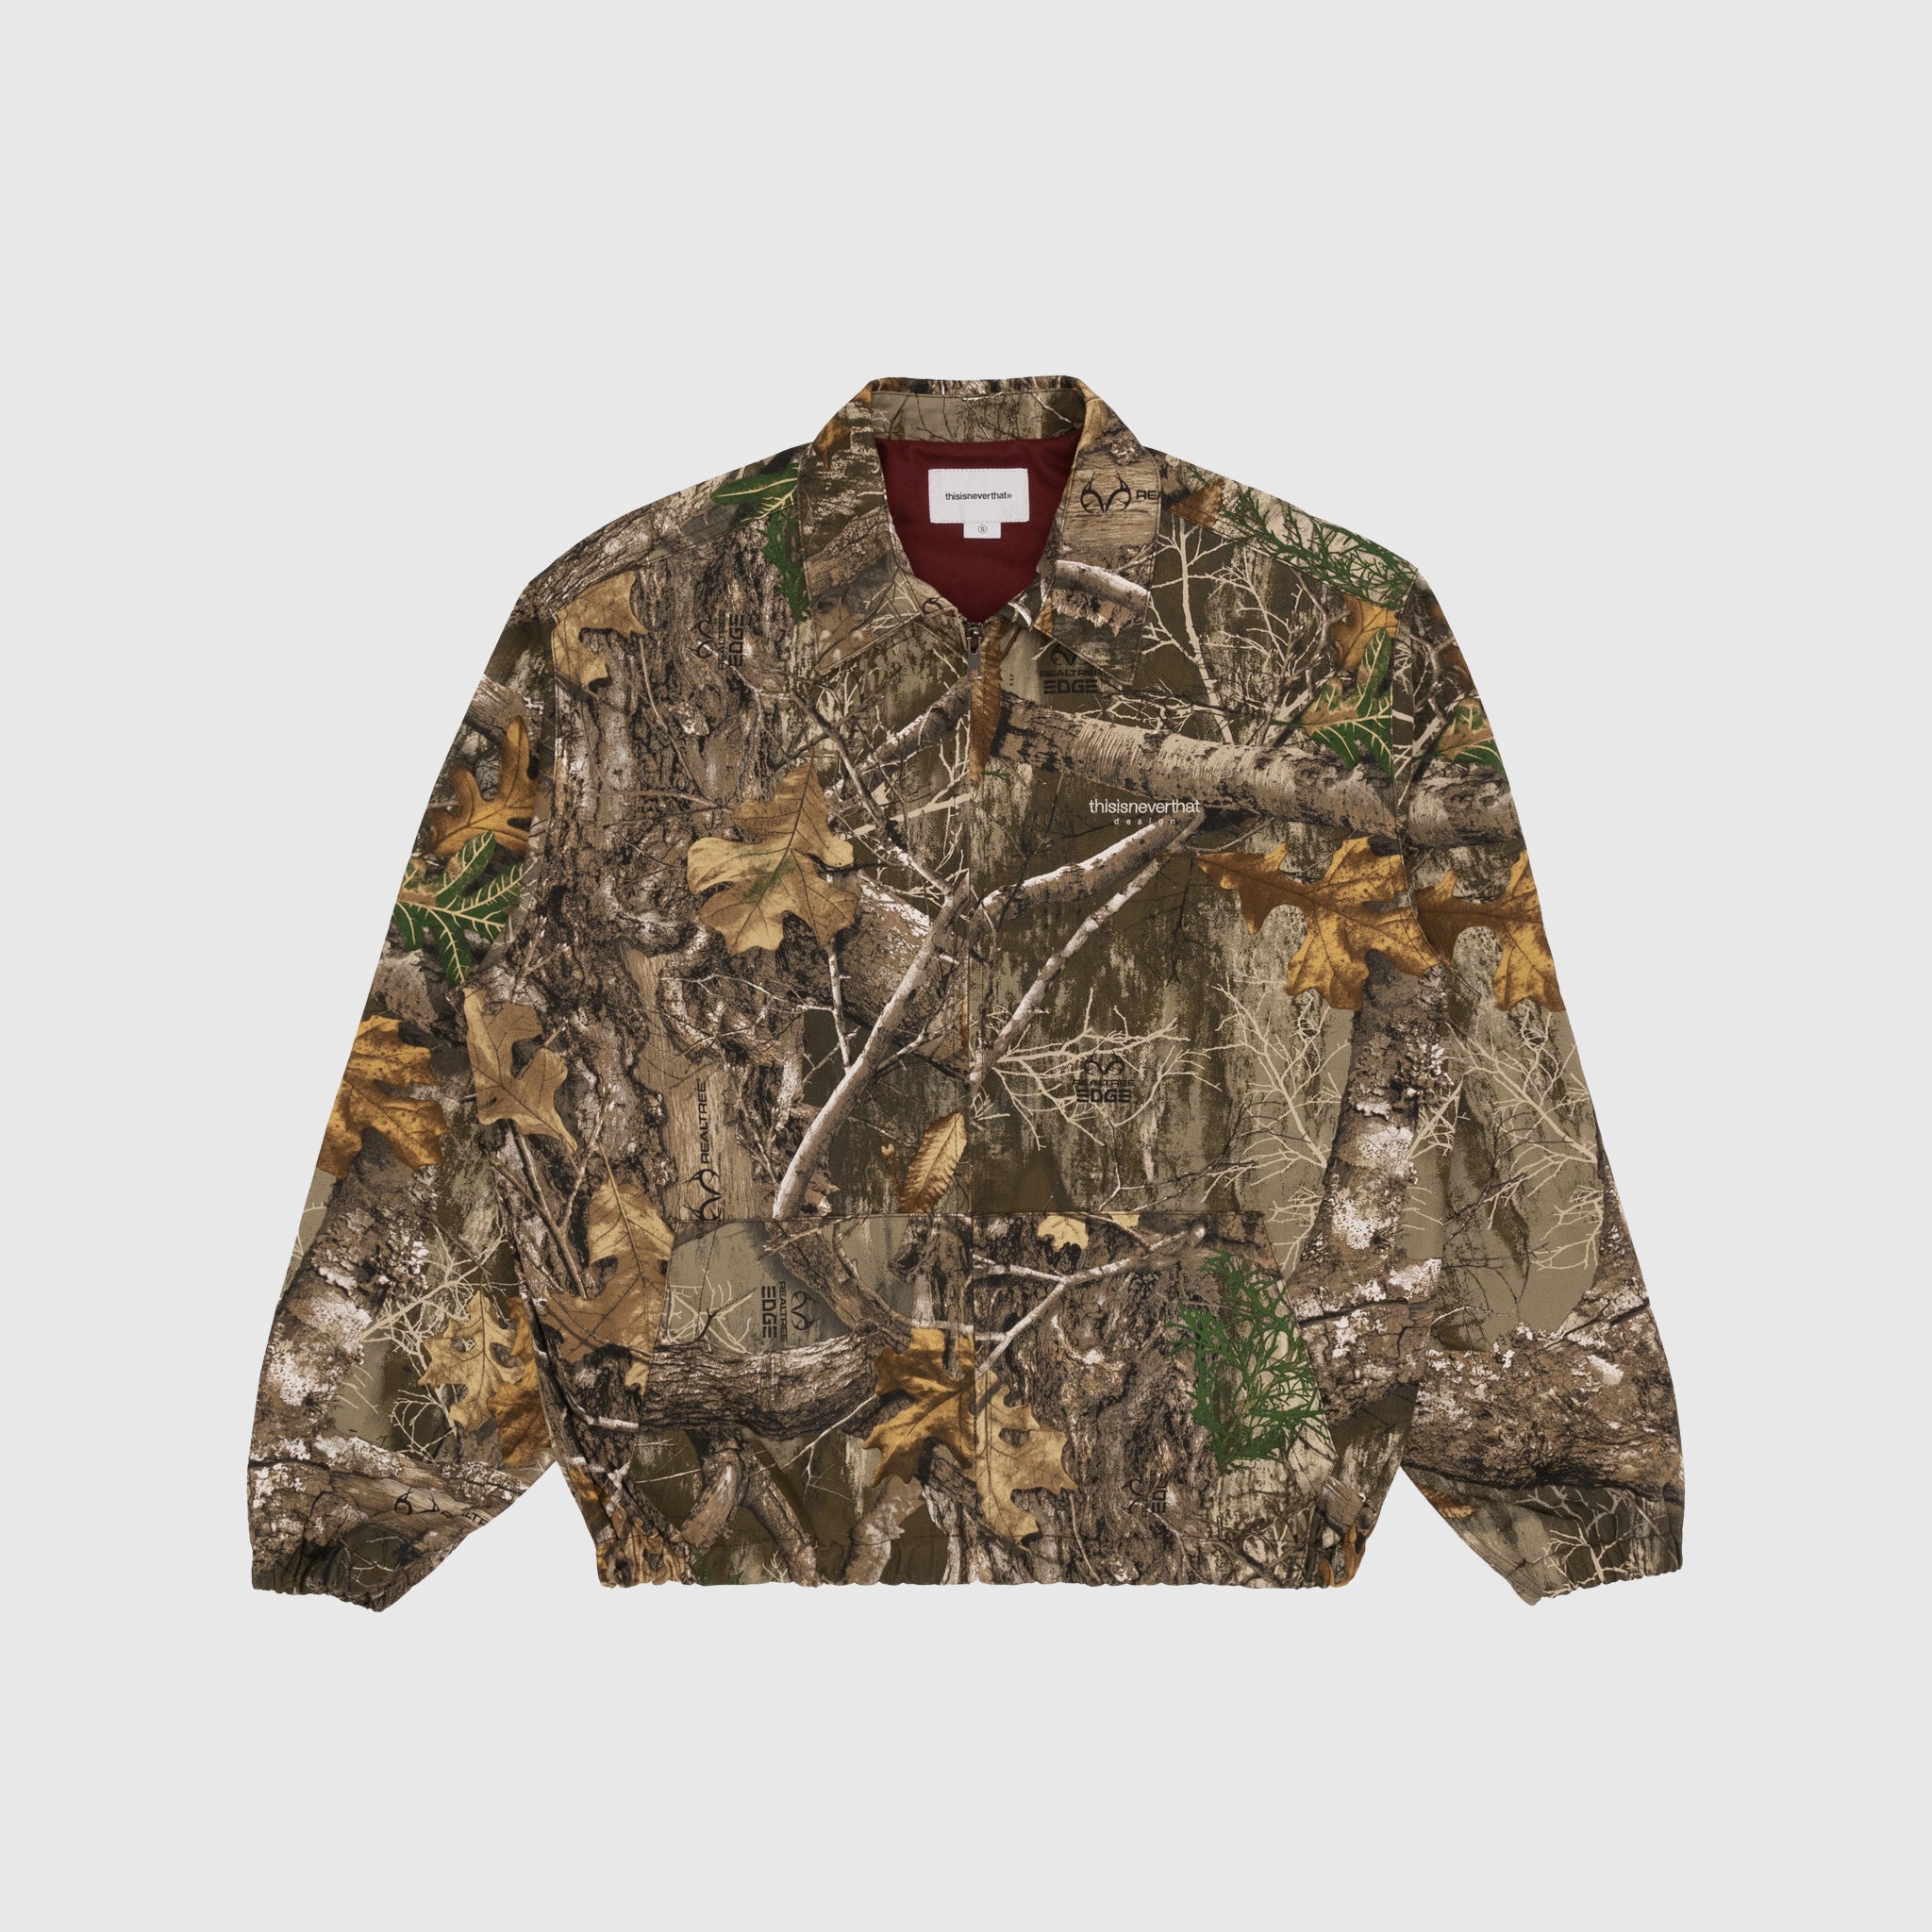 REAL TREE WORK JACKET – PACKER SHOES